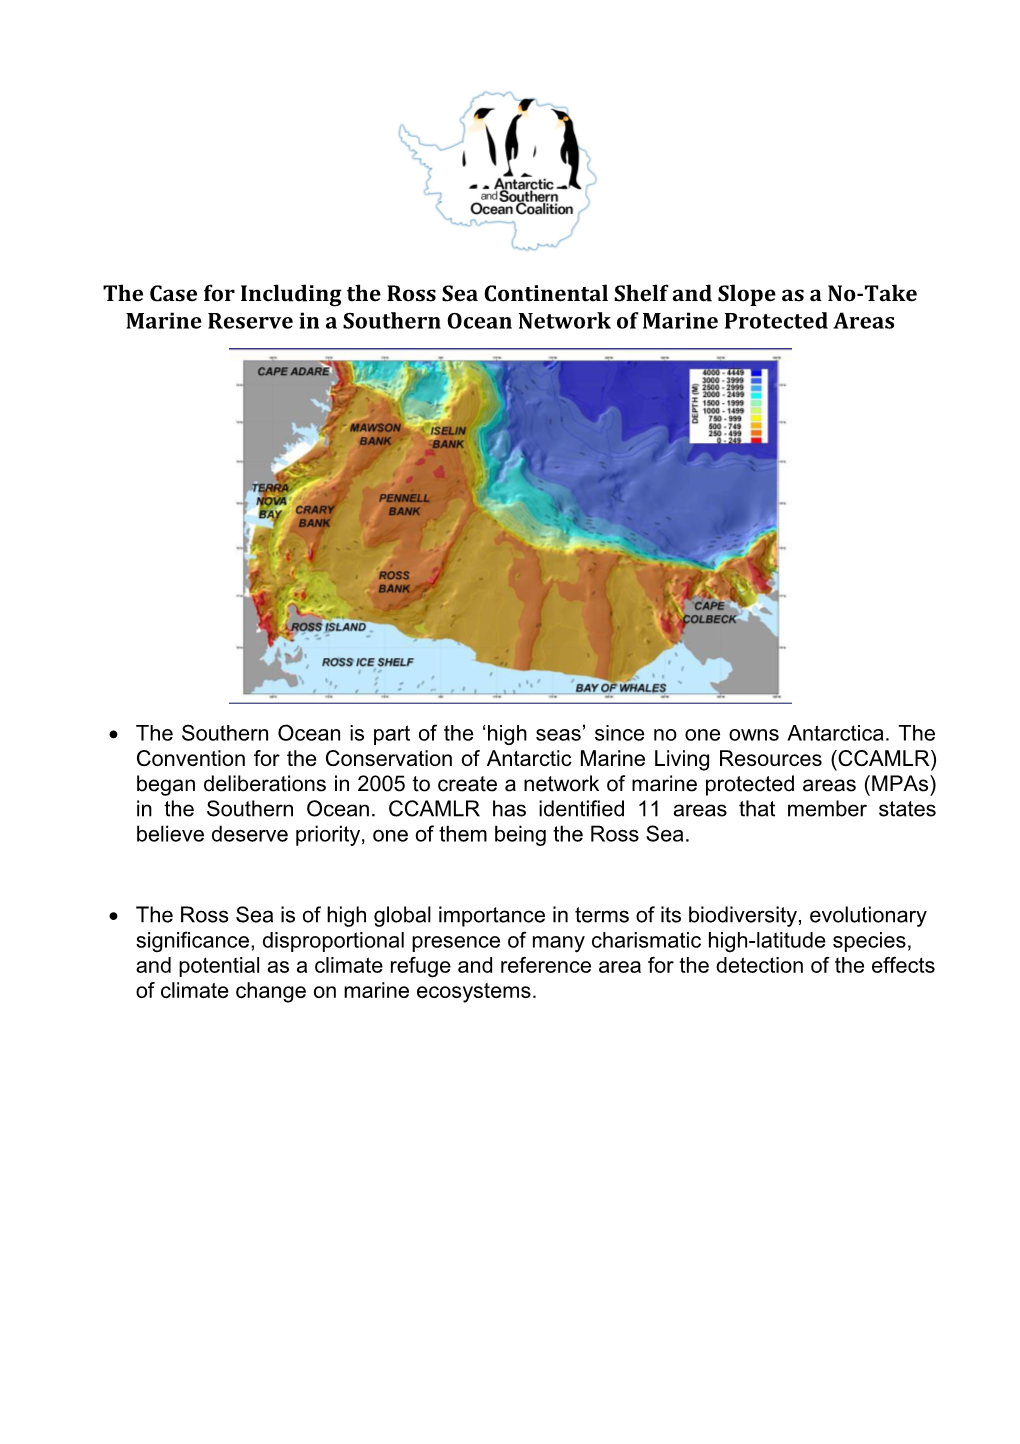 The Case for Including the Ross Sea Continental Shelf and Slope in a Southern Ocean Network